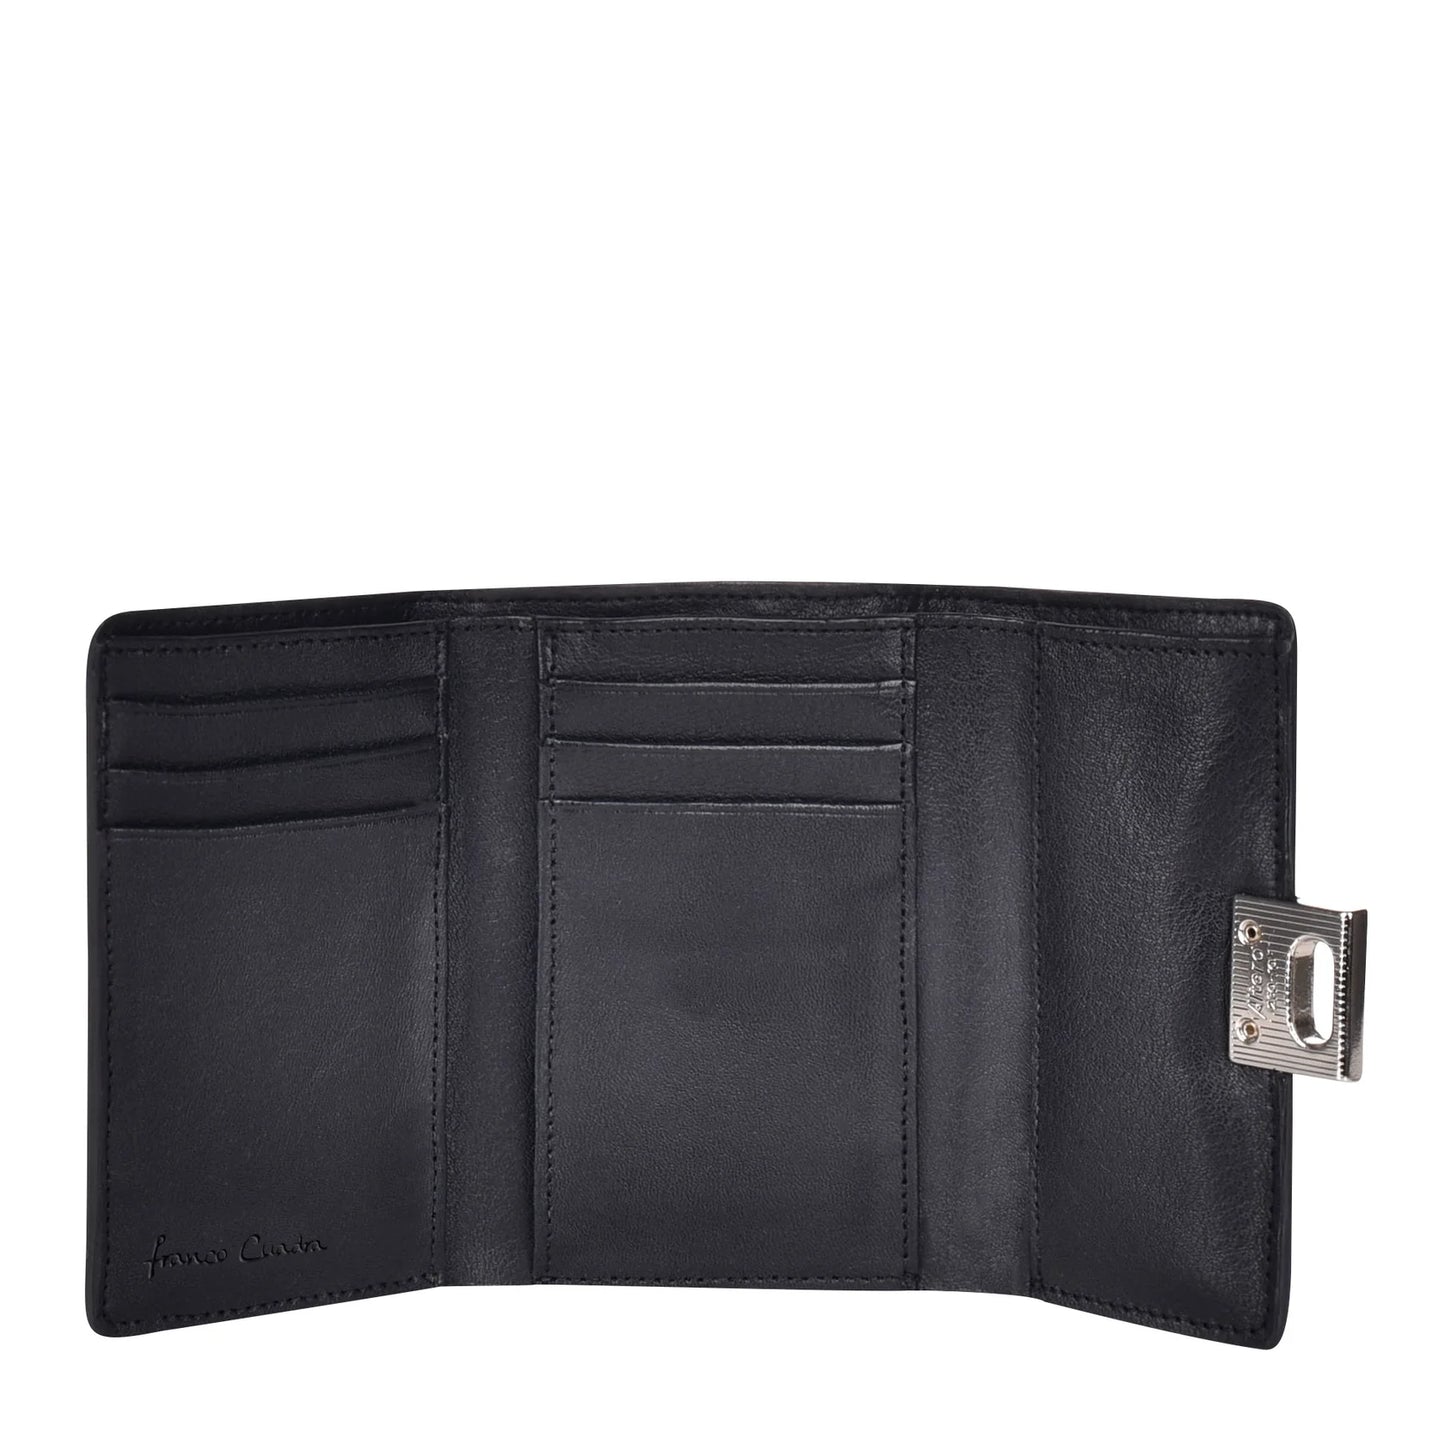 Cuadra engraved black leather trifold wallet